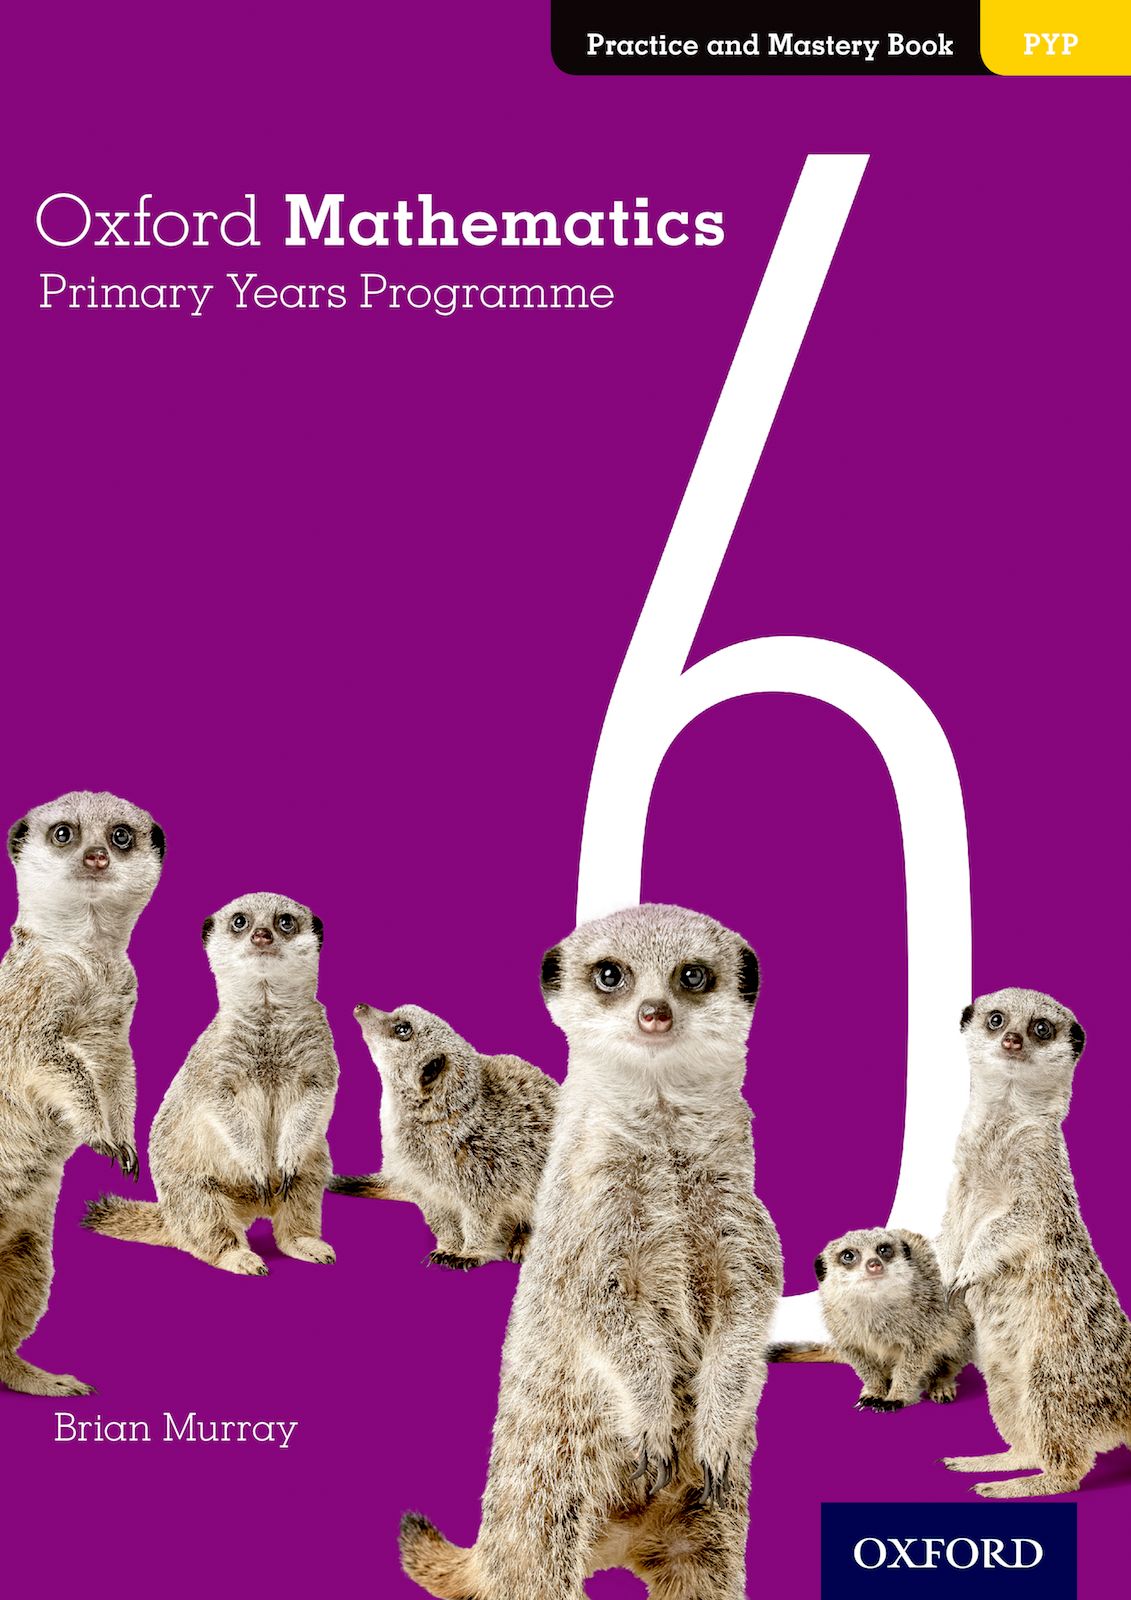 Featured image for “Oxford Mathematics Primary Years Programme Practice and Mastery Book 6”